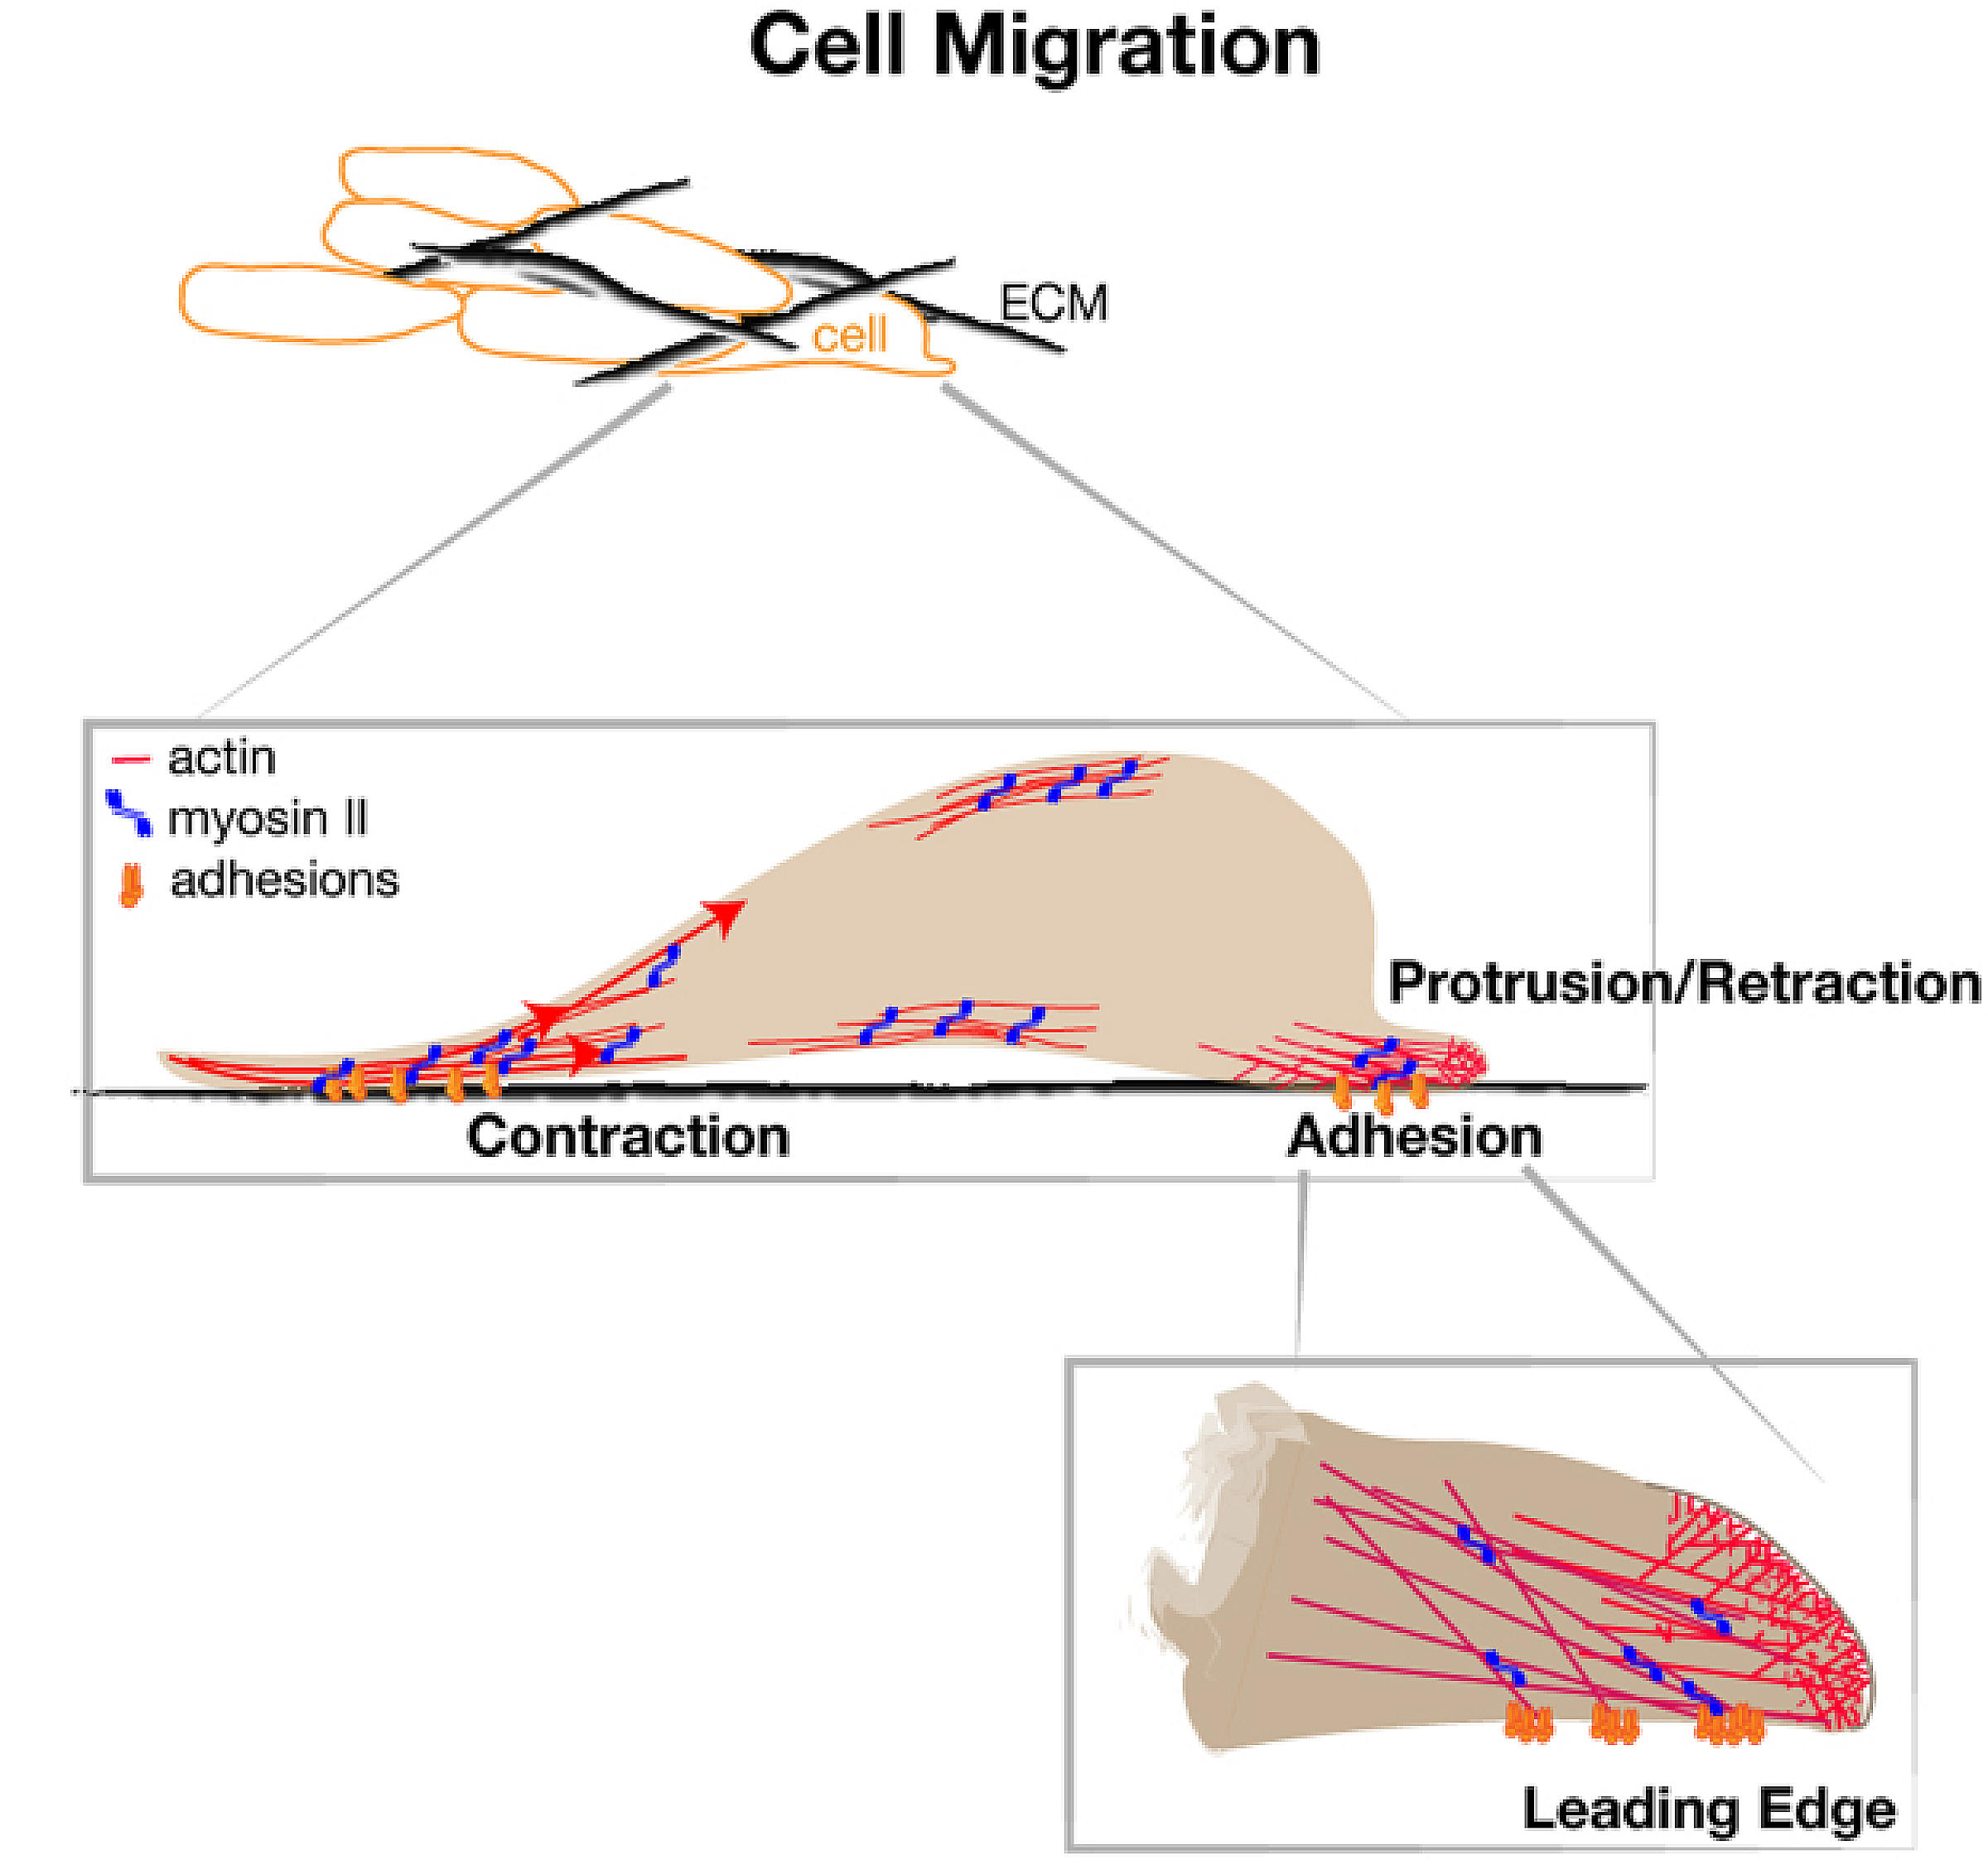 Diagram of edge protrusion during cell migration